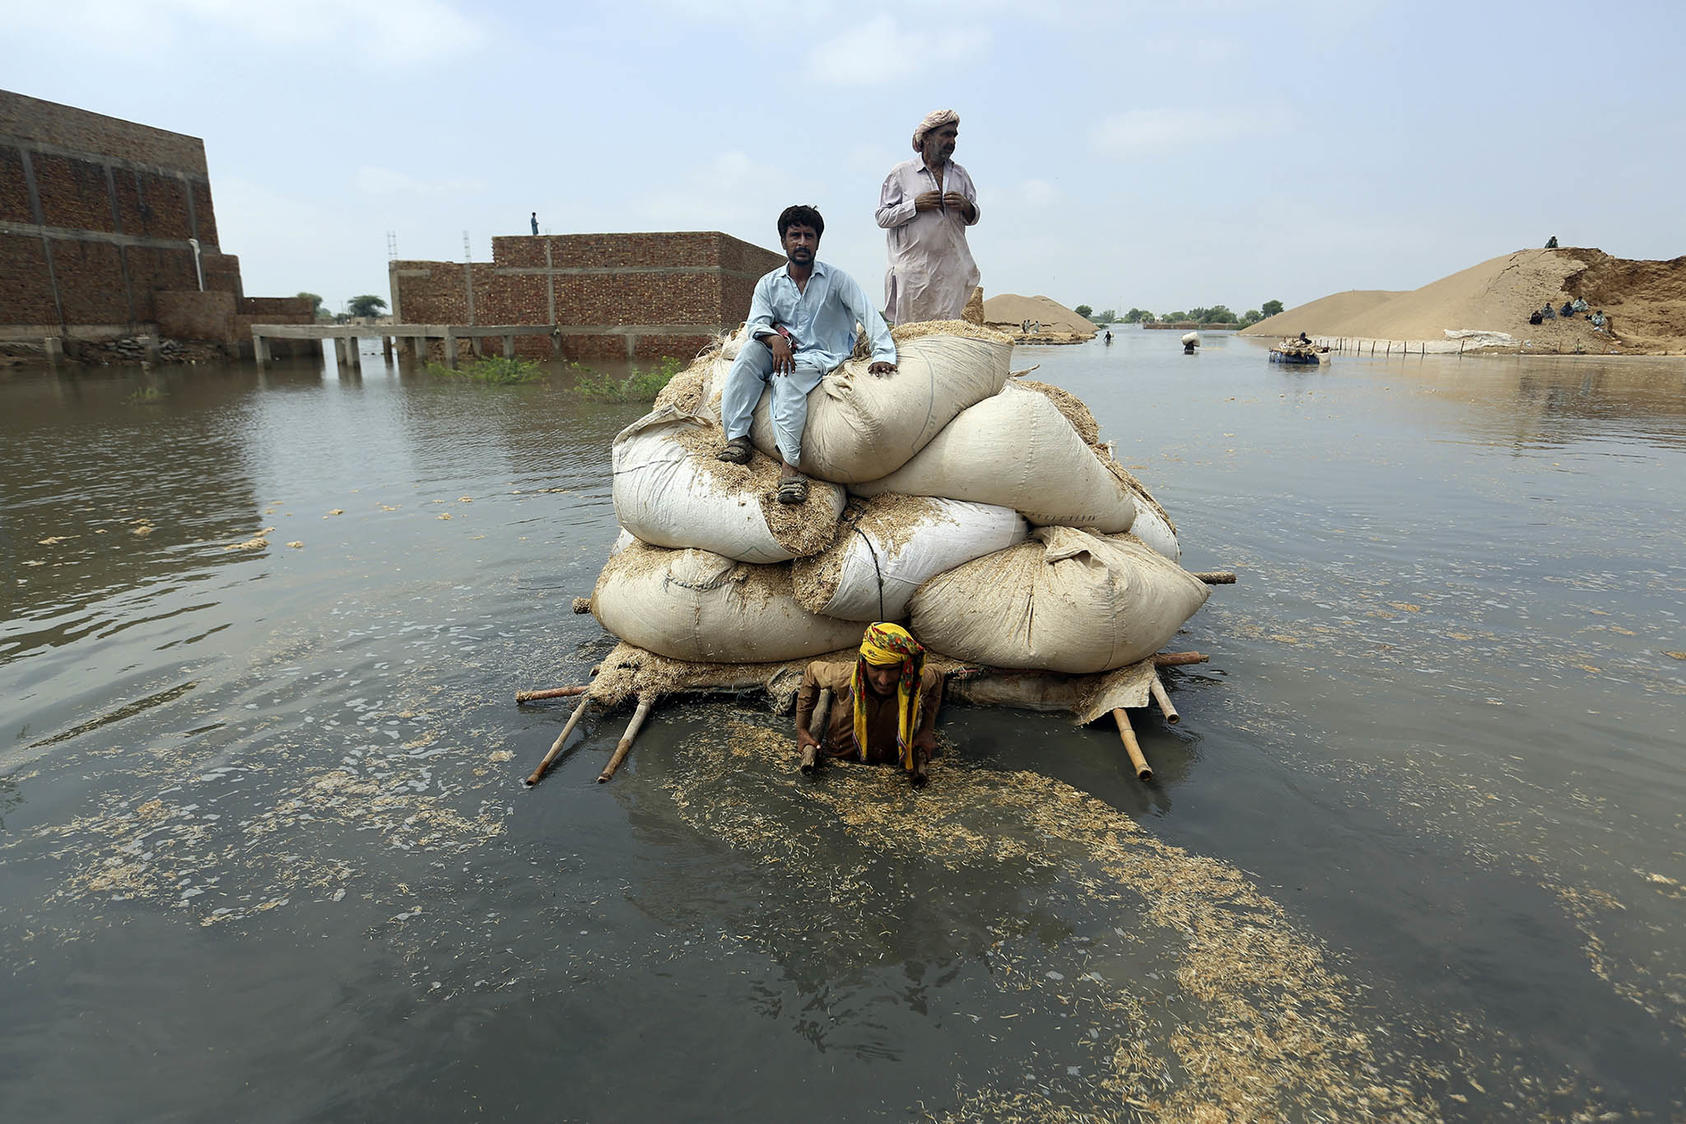 Victims of flooding from torrential monsoon rains use a makeshift barge to carry hay for cattle in Jafarabad, Pakistan, on September 5, 2022. (Photo by Fareed Khan/AP)